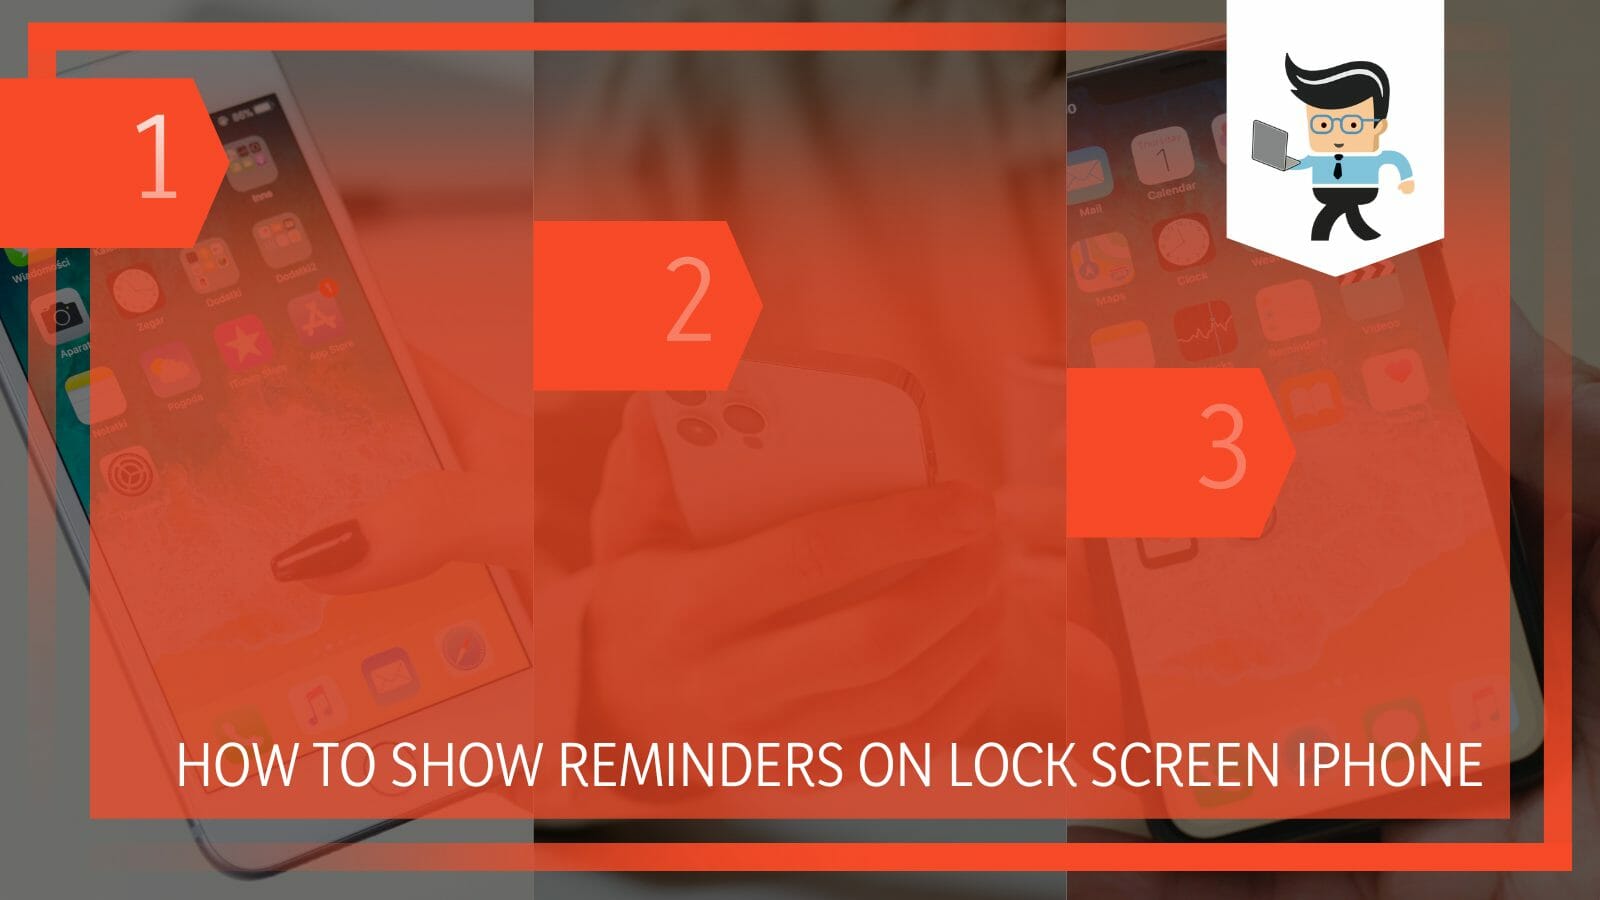 How To Show Reminders On Lock Screen iPhone